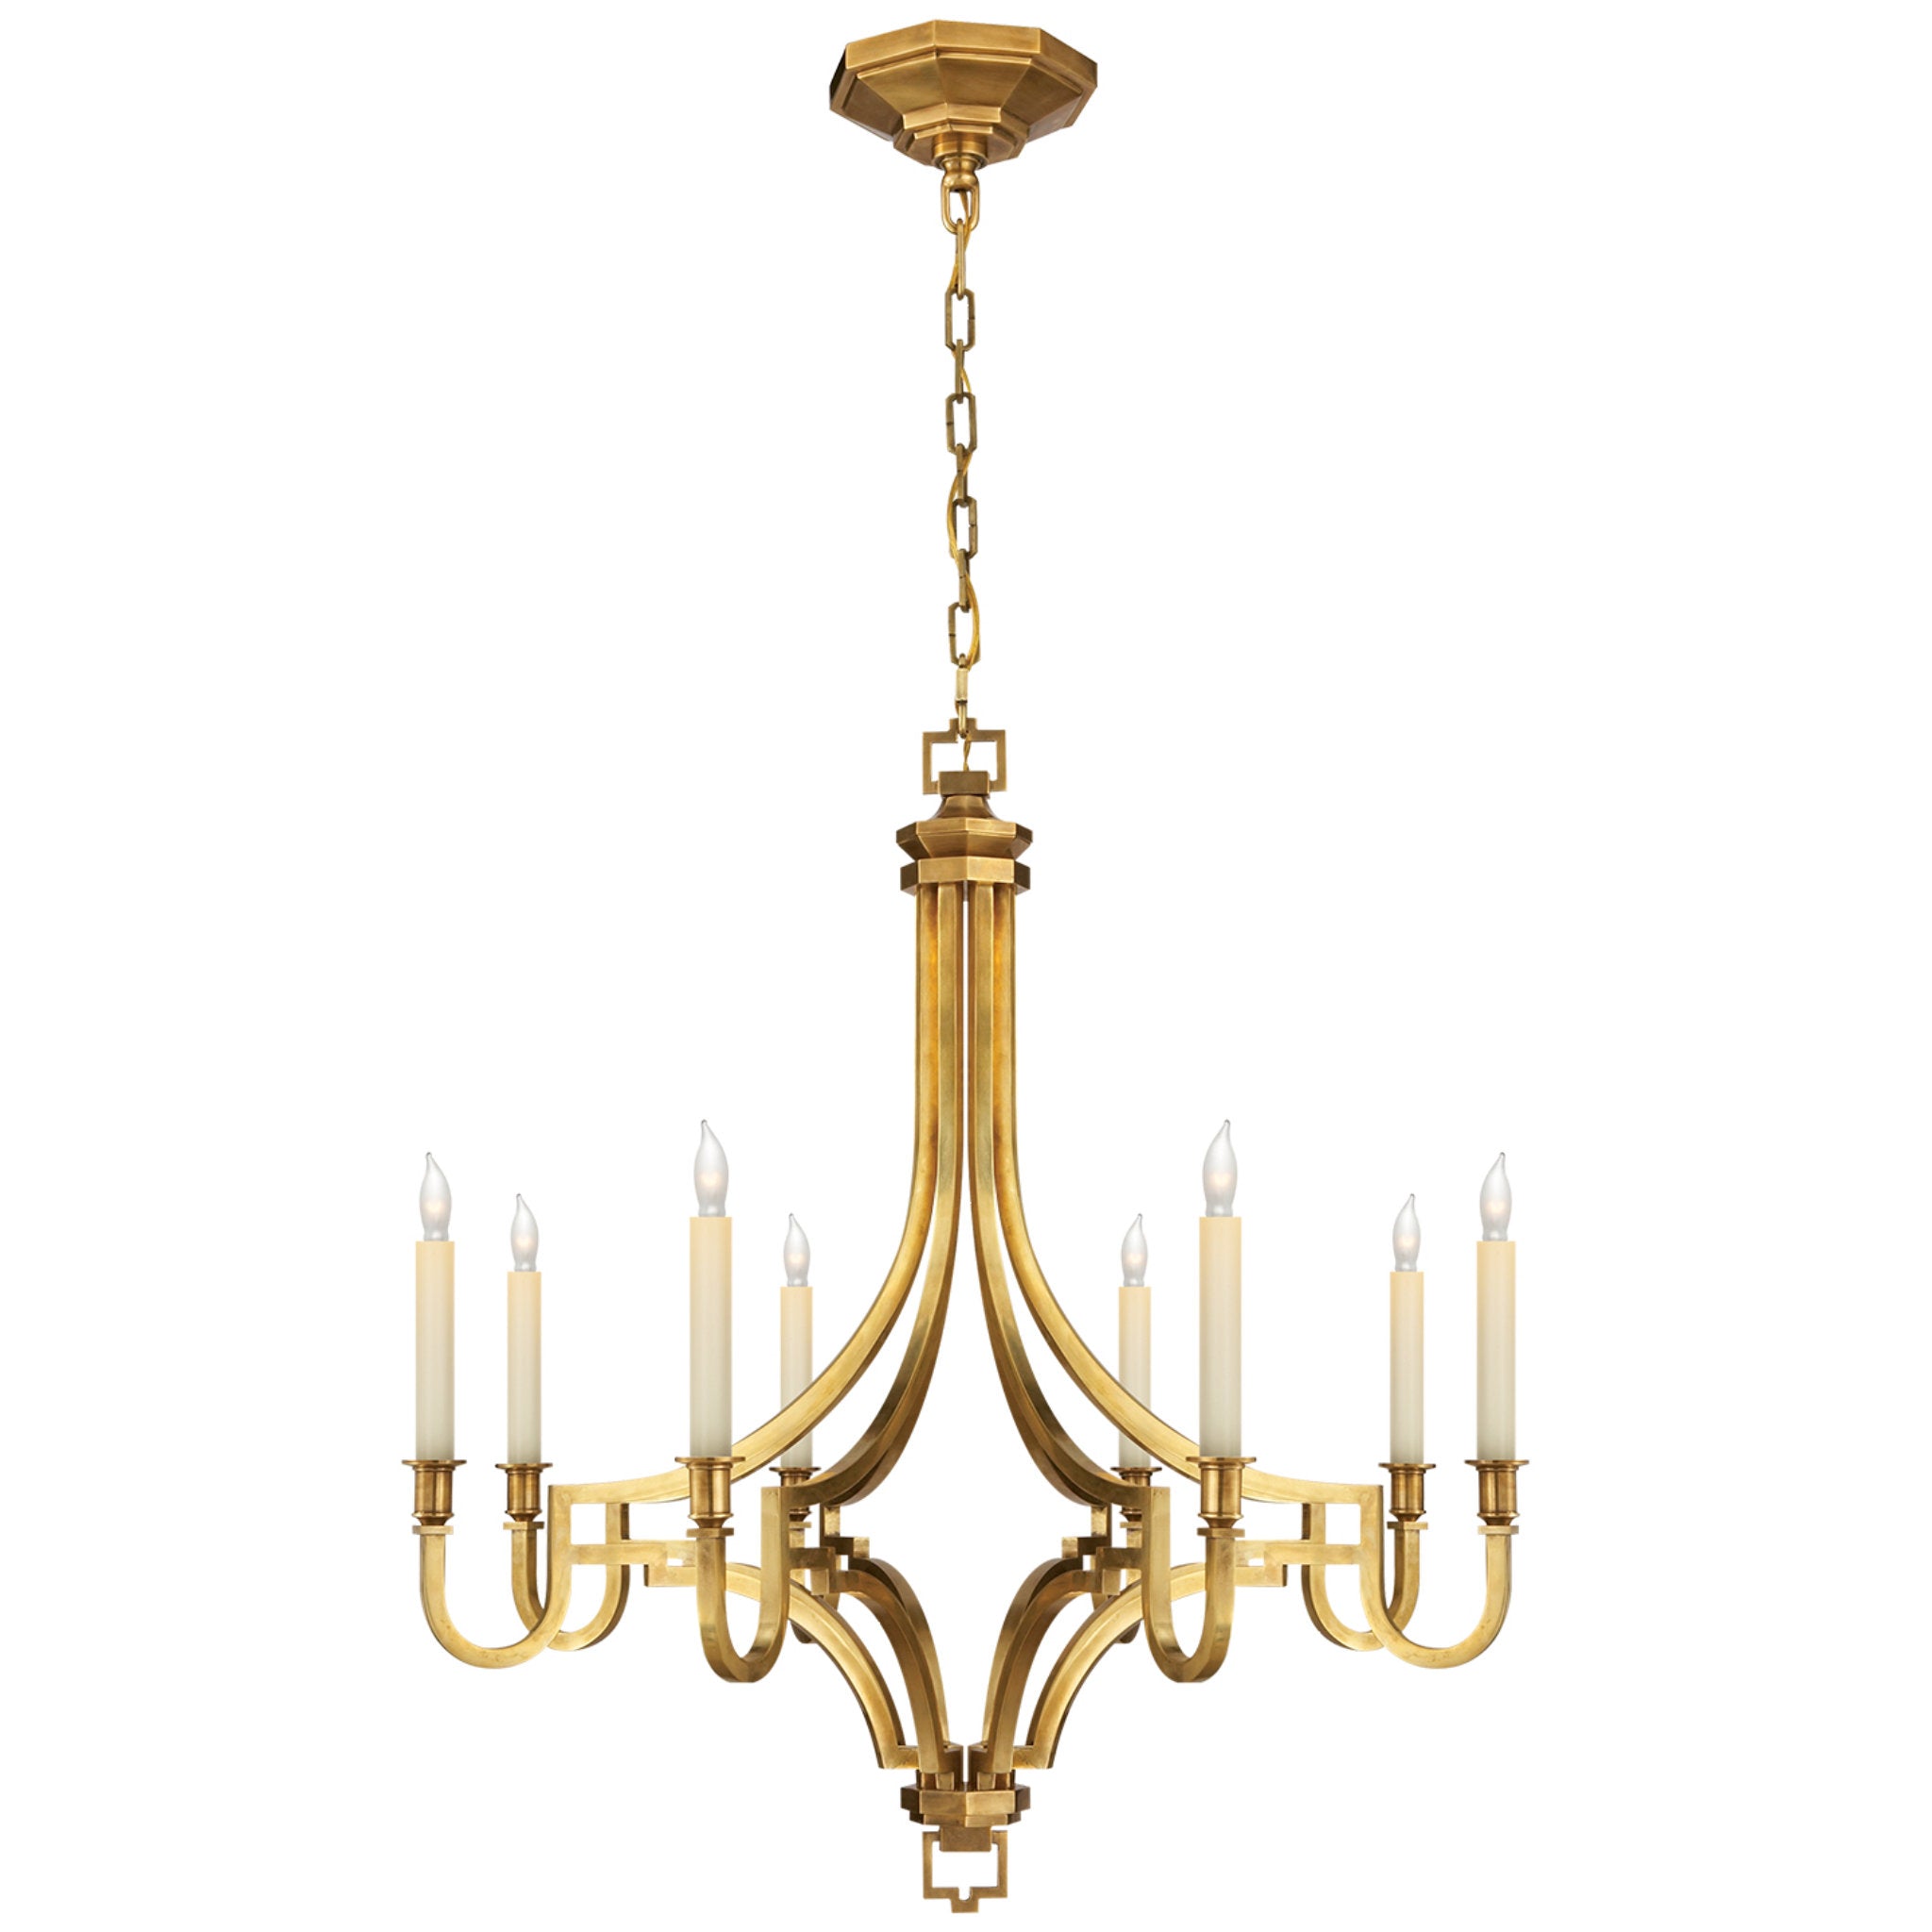 CHD2527AB by Visual Comfort - Parkington Small Single Wall Light in  Antique-Burnished Brass